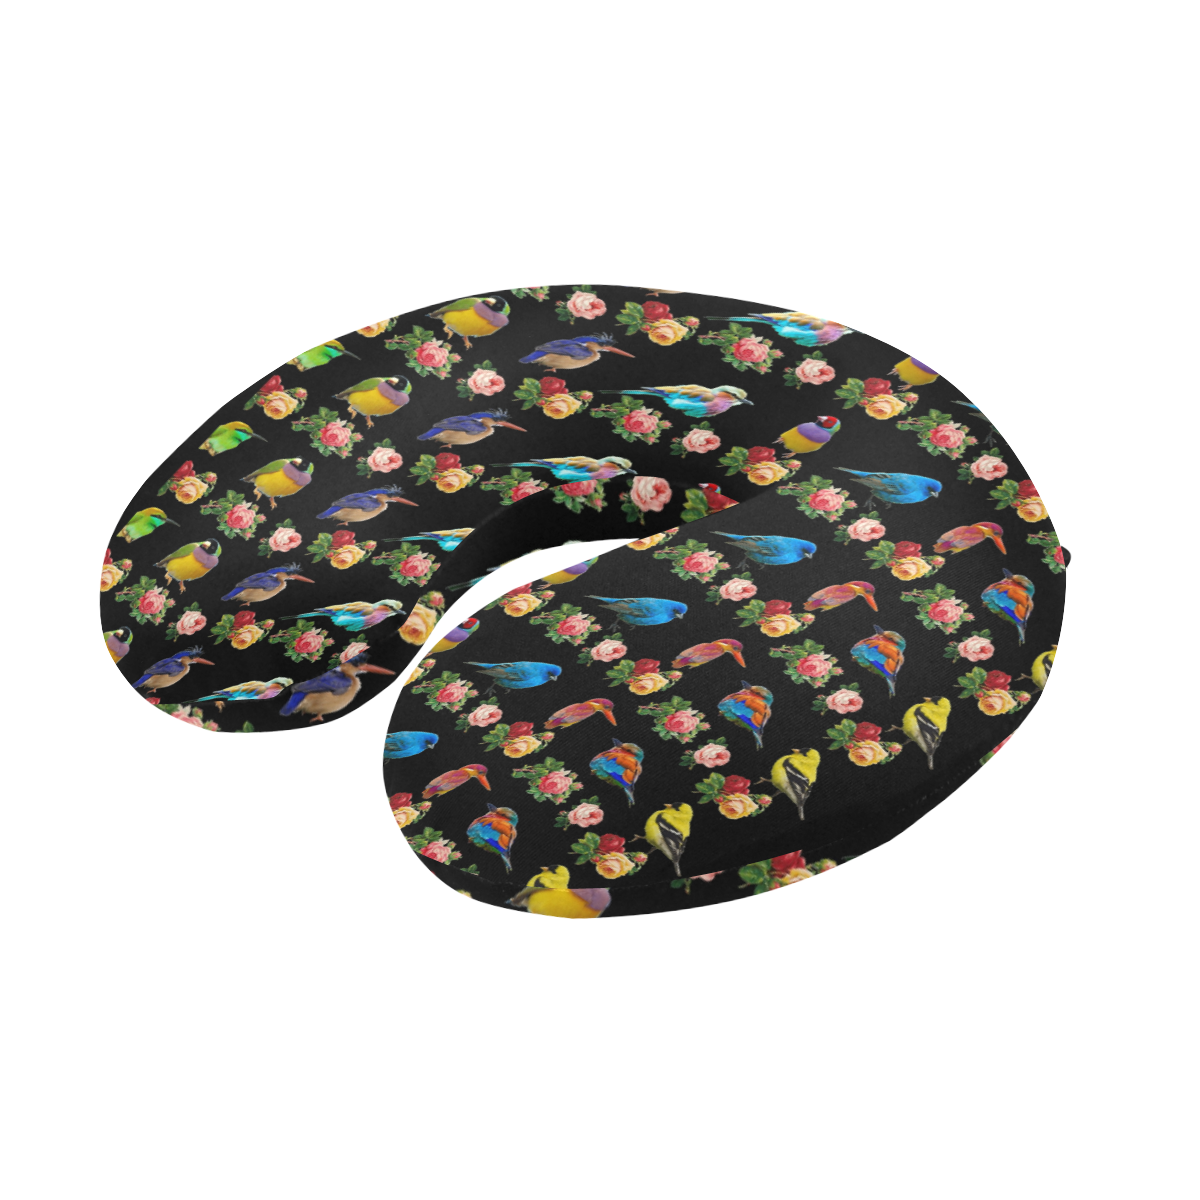 All the Birds and Roses U-Shape Travel Pillow